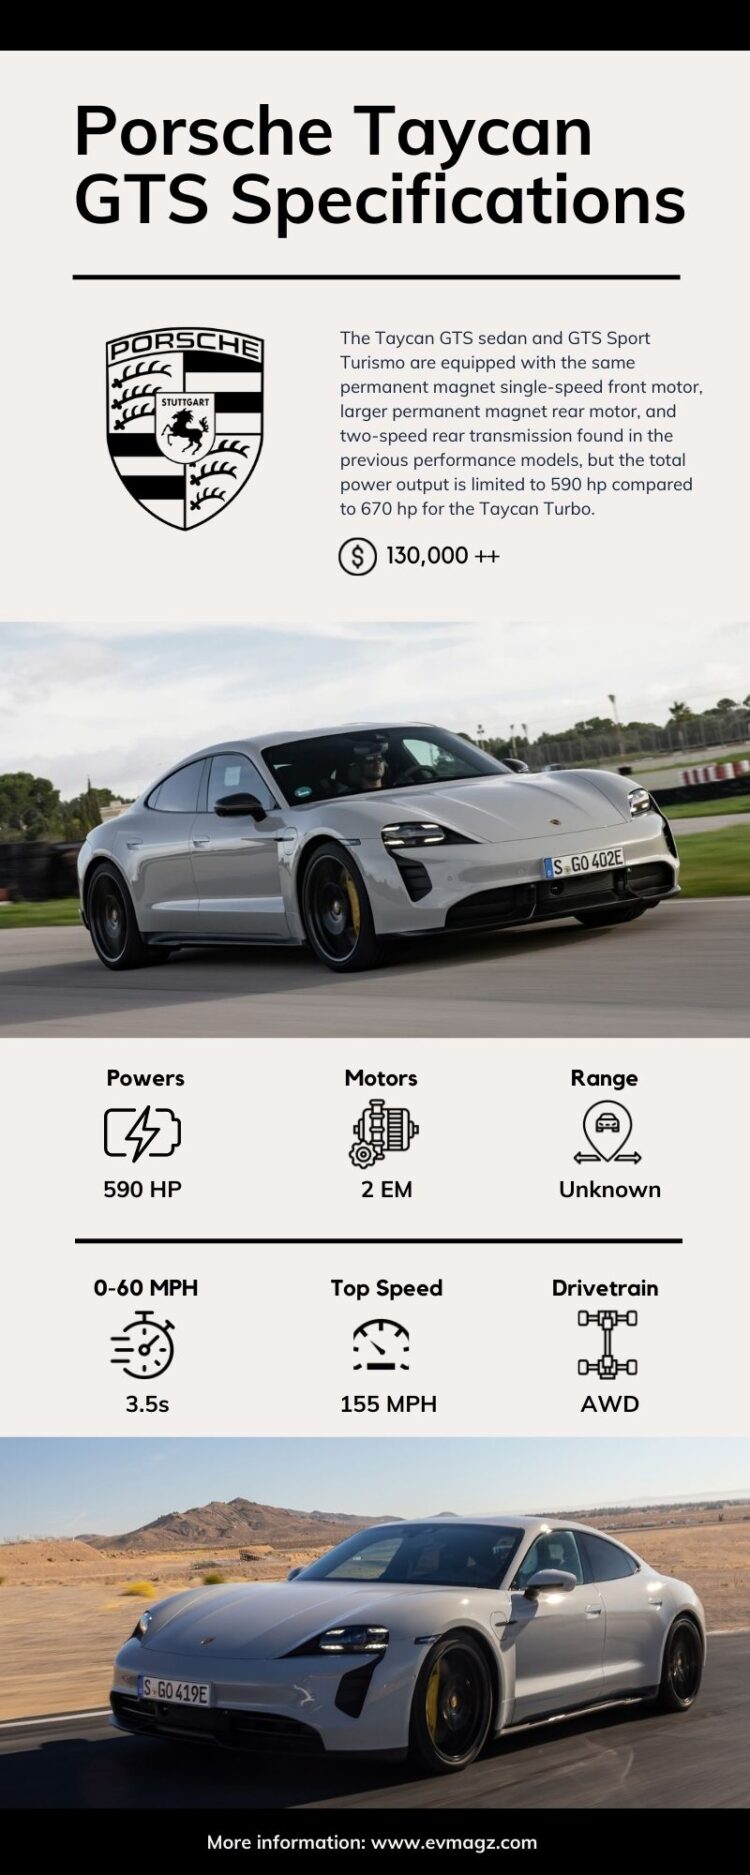 Porsche Taycan GTS Price and Specifications [Infographic]